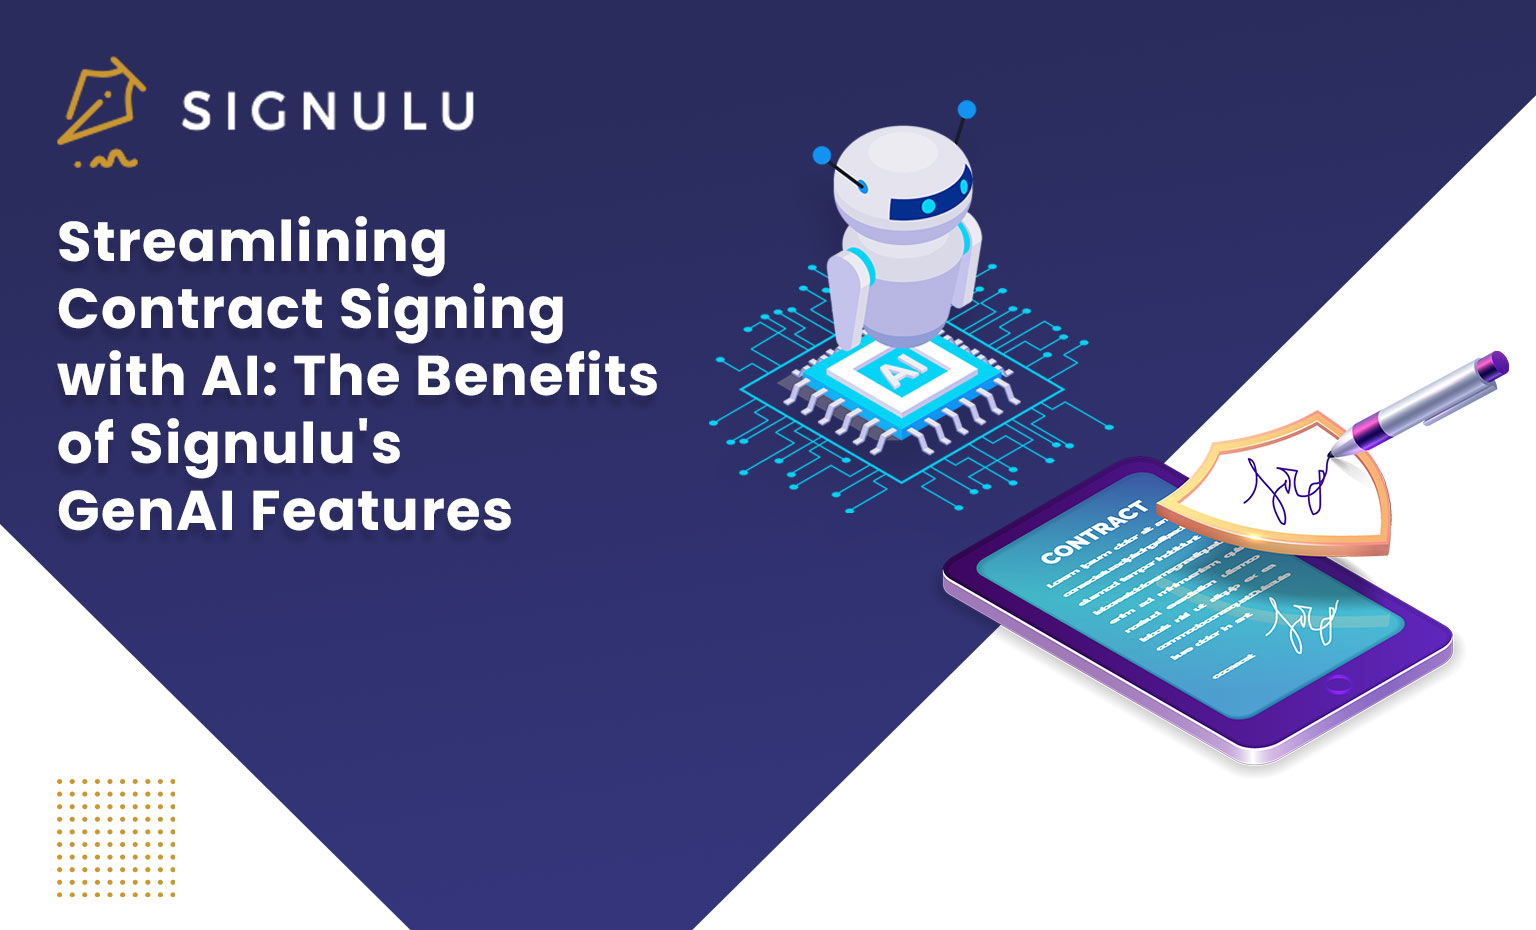 Streamlining Contract Signing with AI: The Benefits of Signulu’s GenAI Features